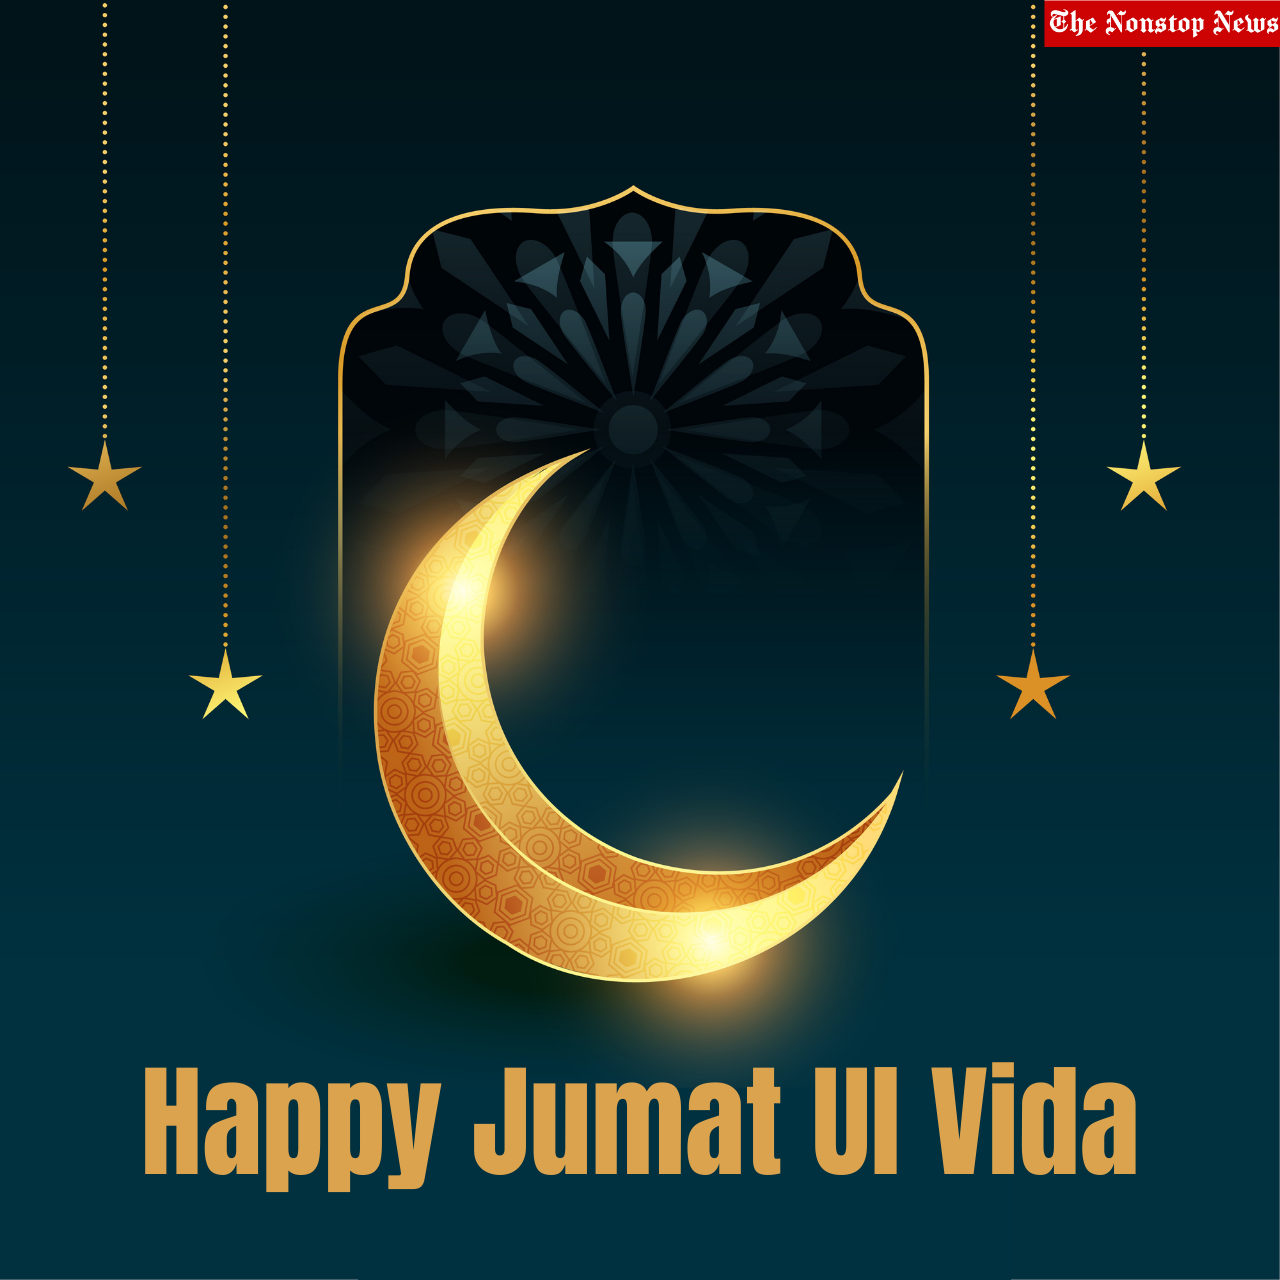 Jumat Ul-Vida 2022: Best Quotes, Wishes, HD Images, Messages, Greetings, Status To Share